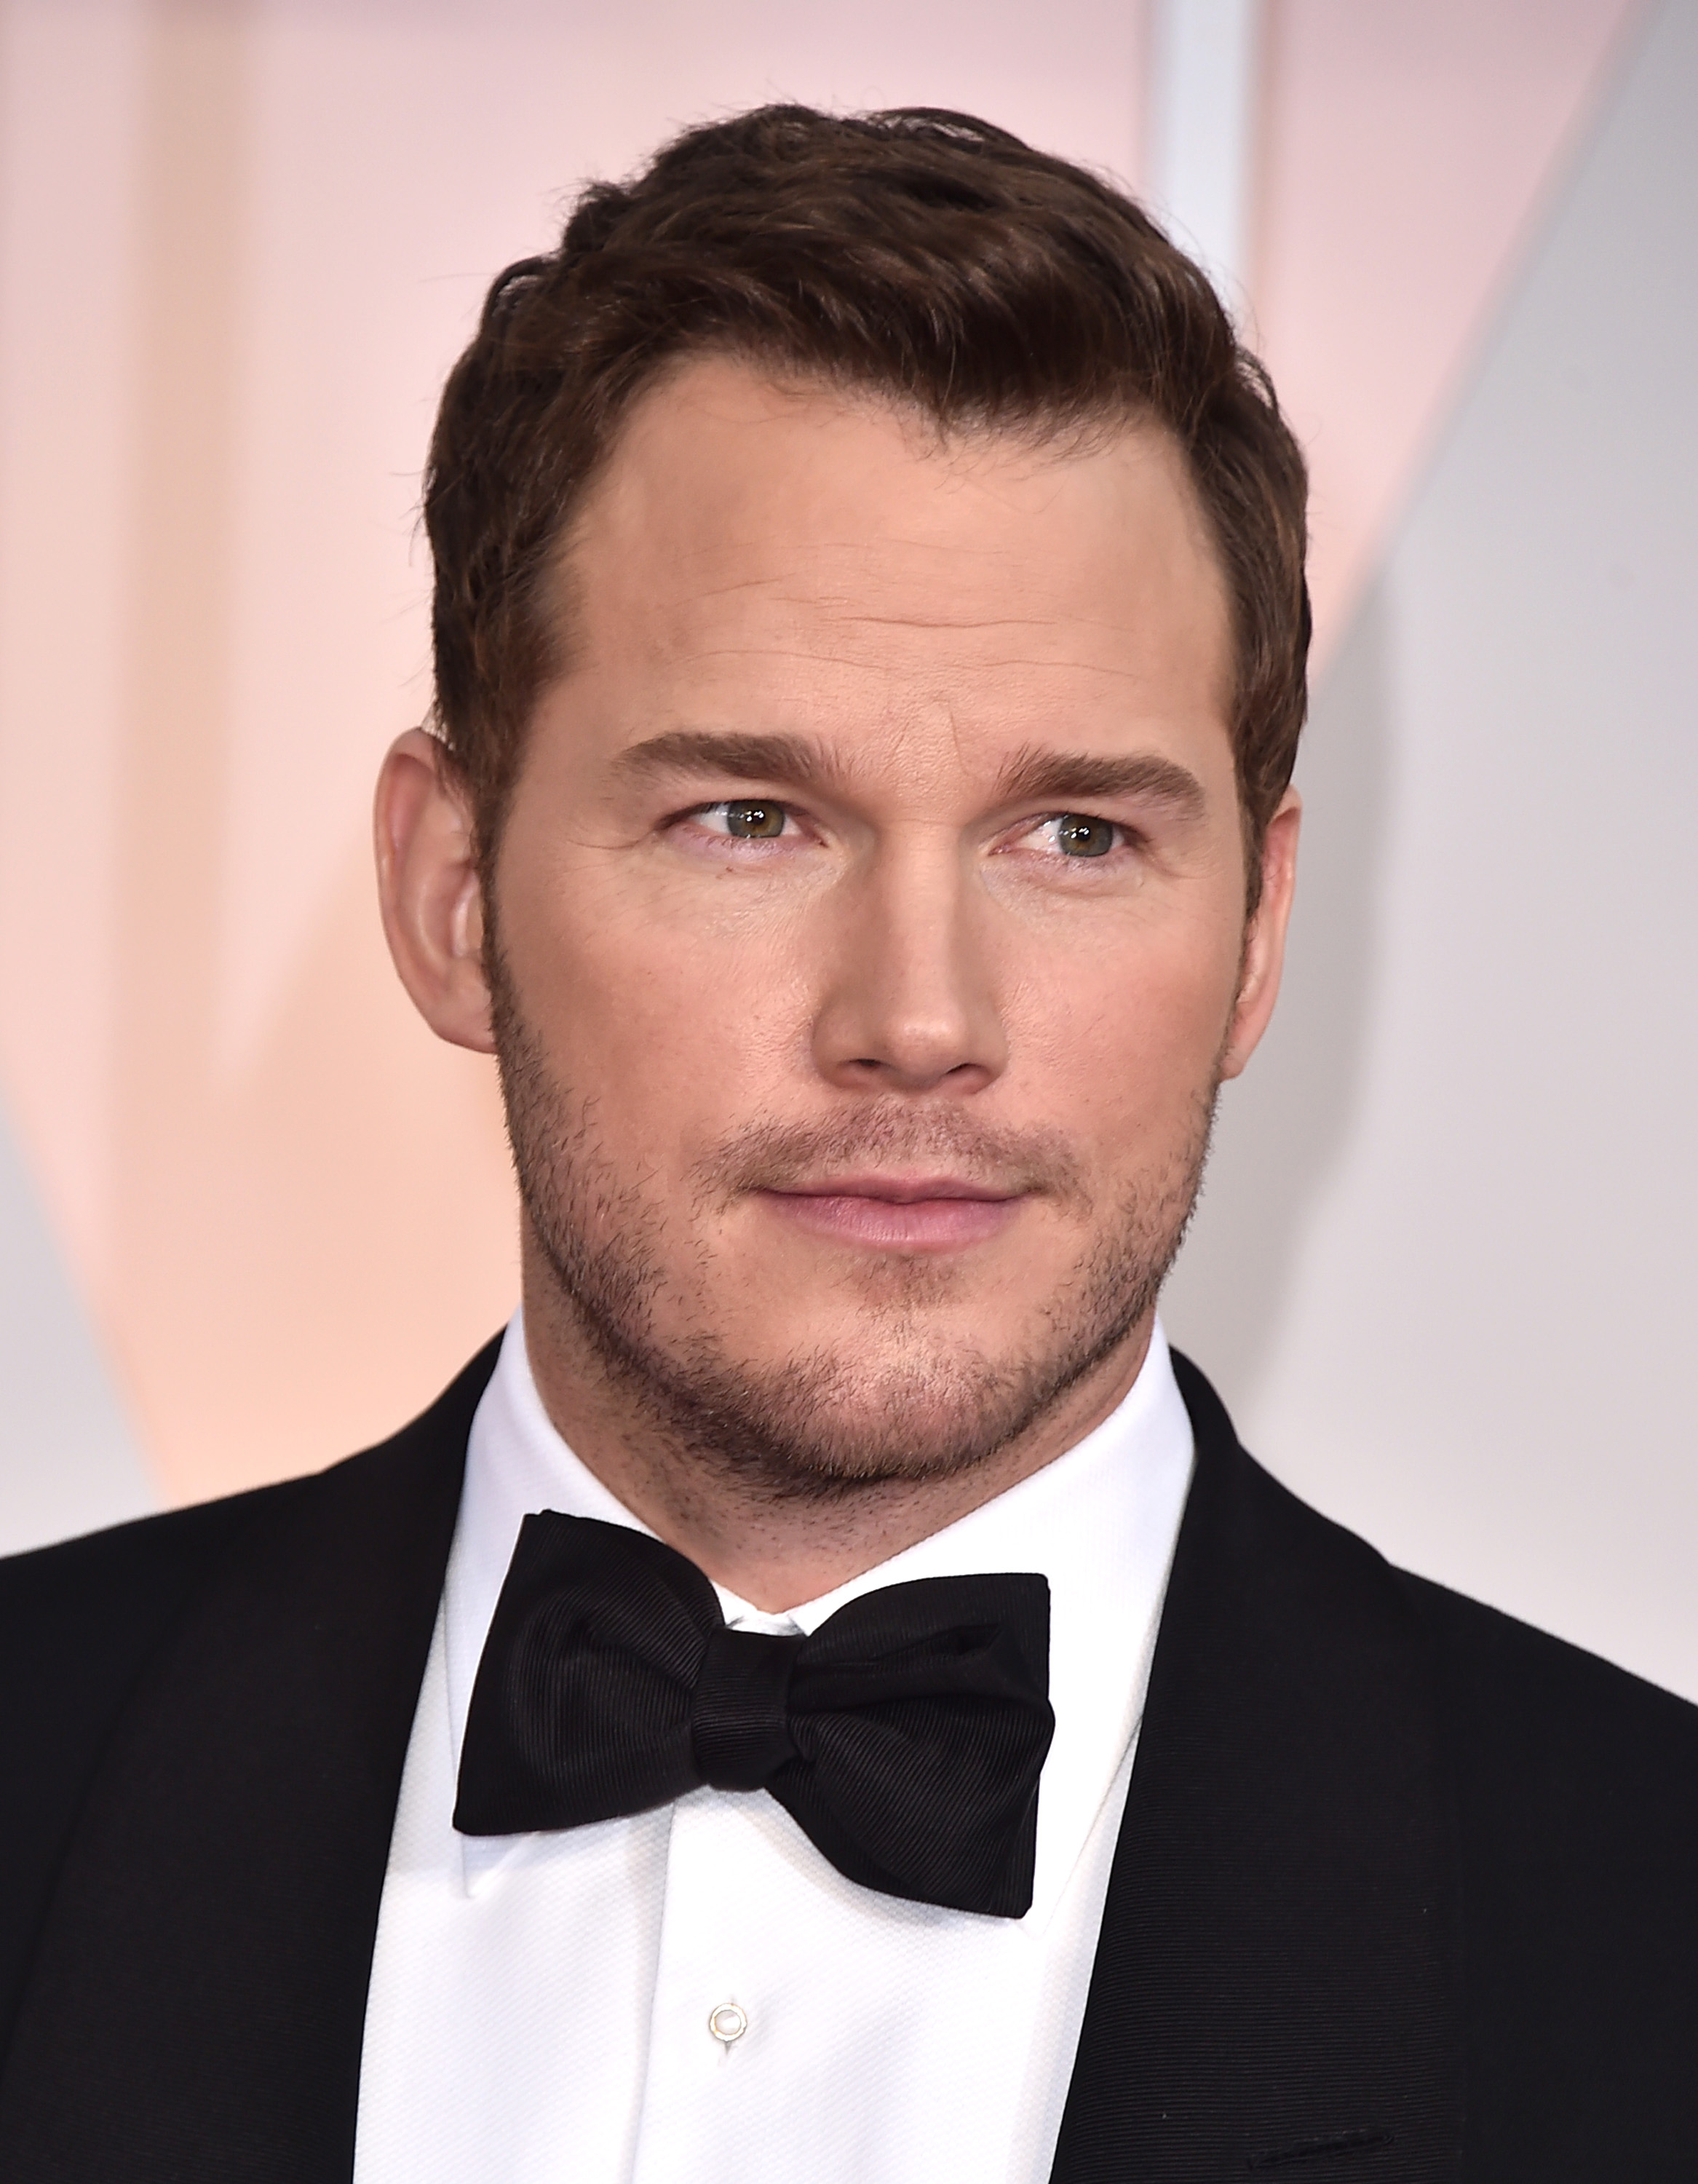 Chris Pratt arrives at the Oscars on Feb. 22, 2015, at the Dolby Theatre in Los Angeles.